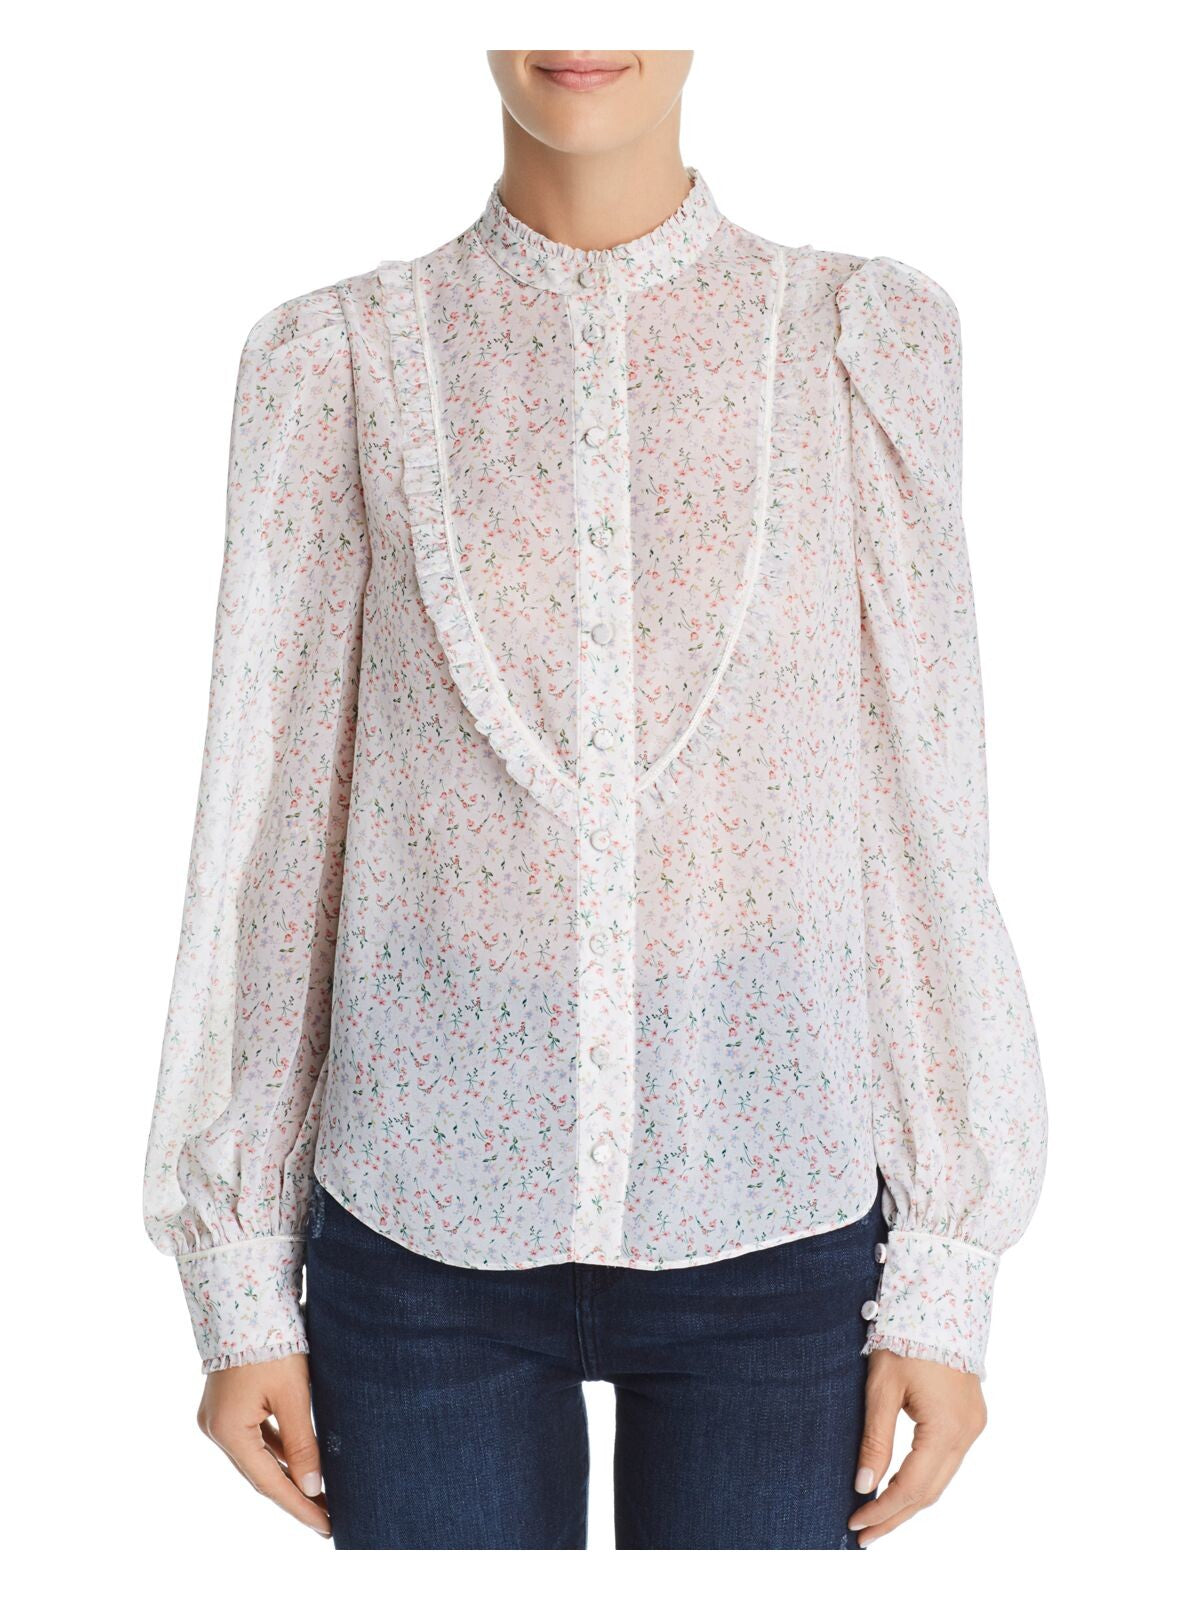 DIVINE HERITAGE Womens White Floral Long Sleeve Button Up Top Size: L